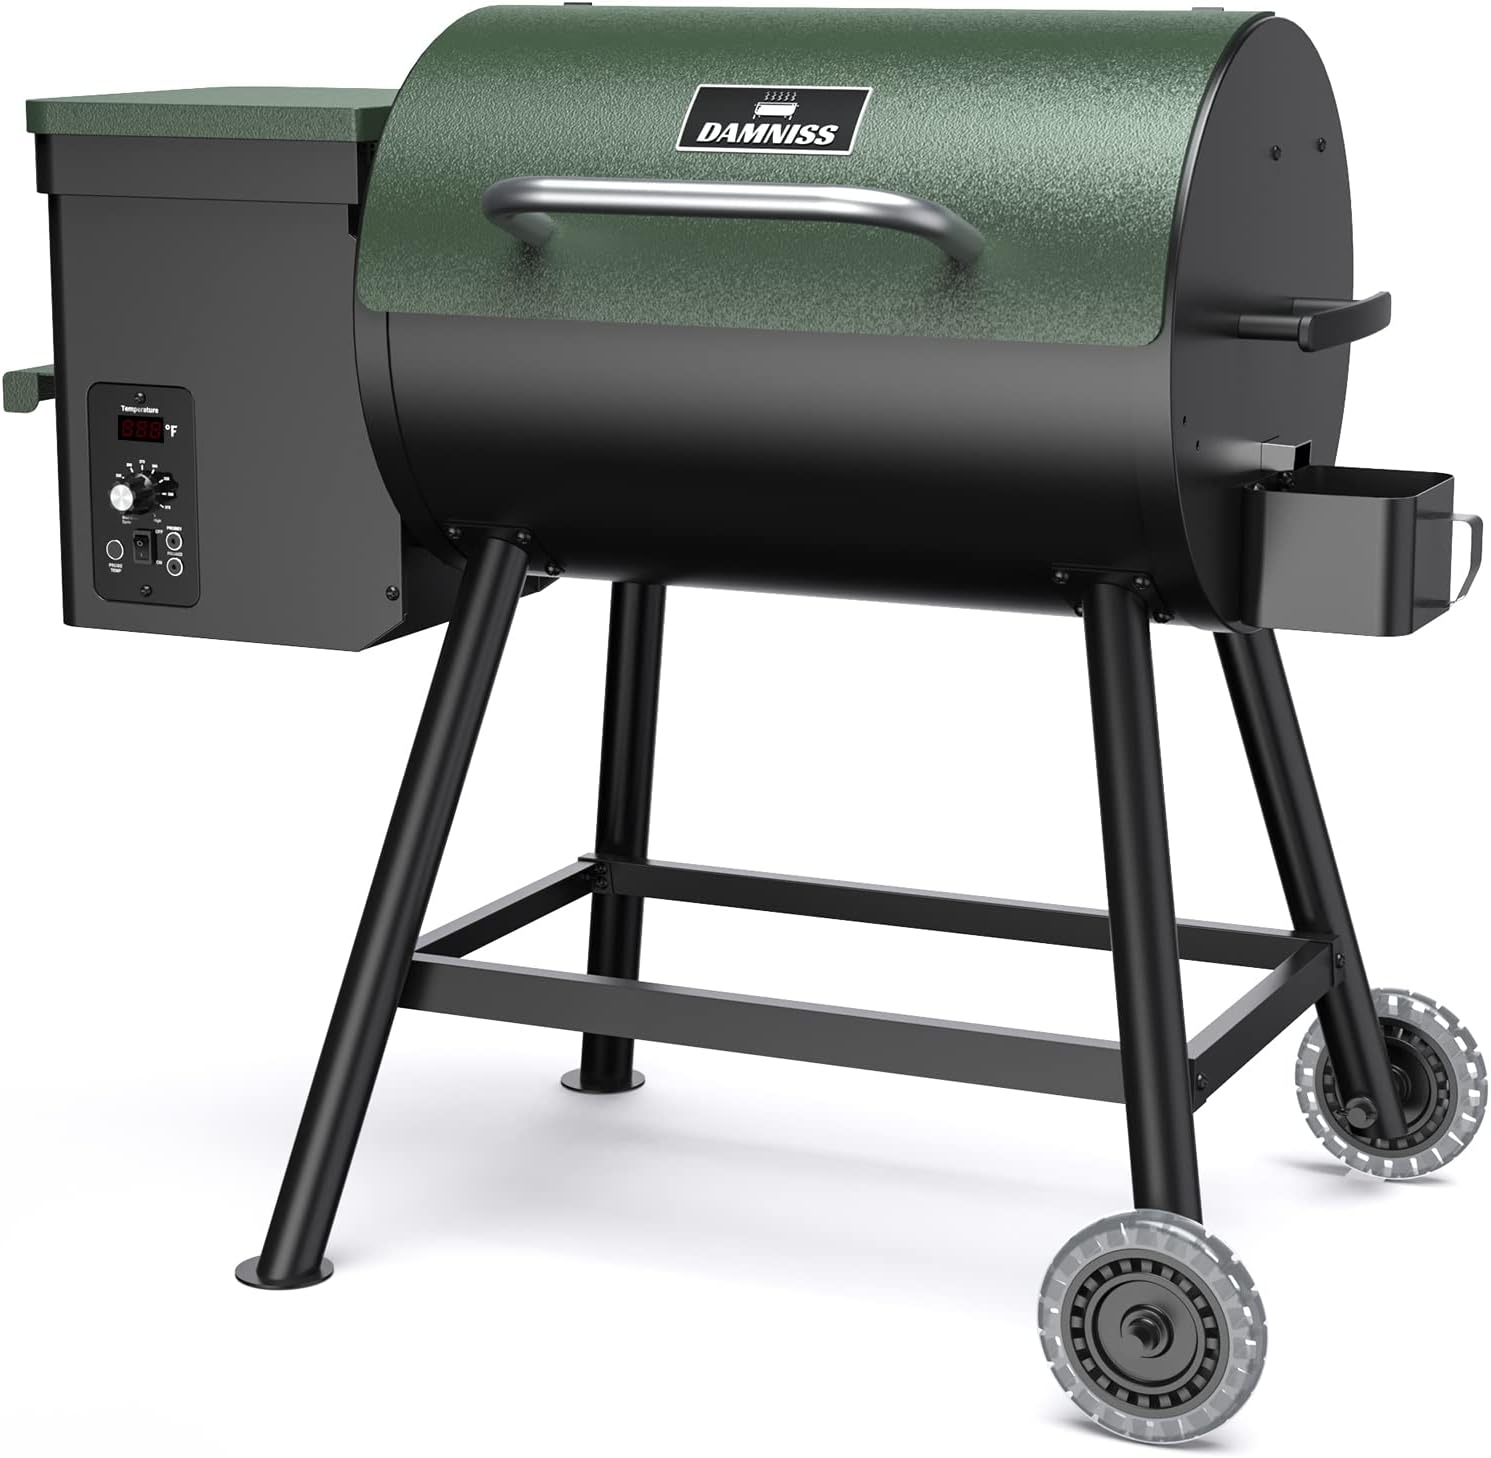 DAMNISS Wood Pellet Grill Review